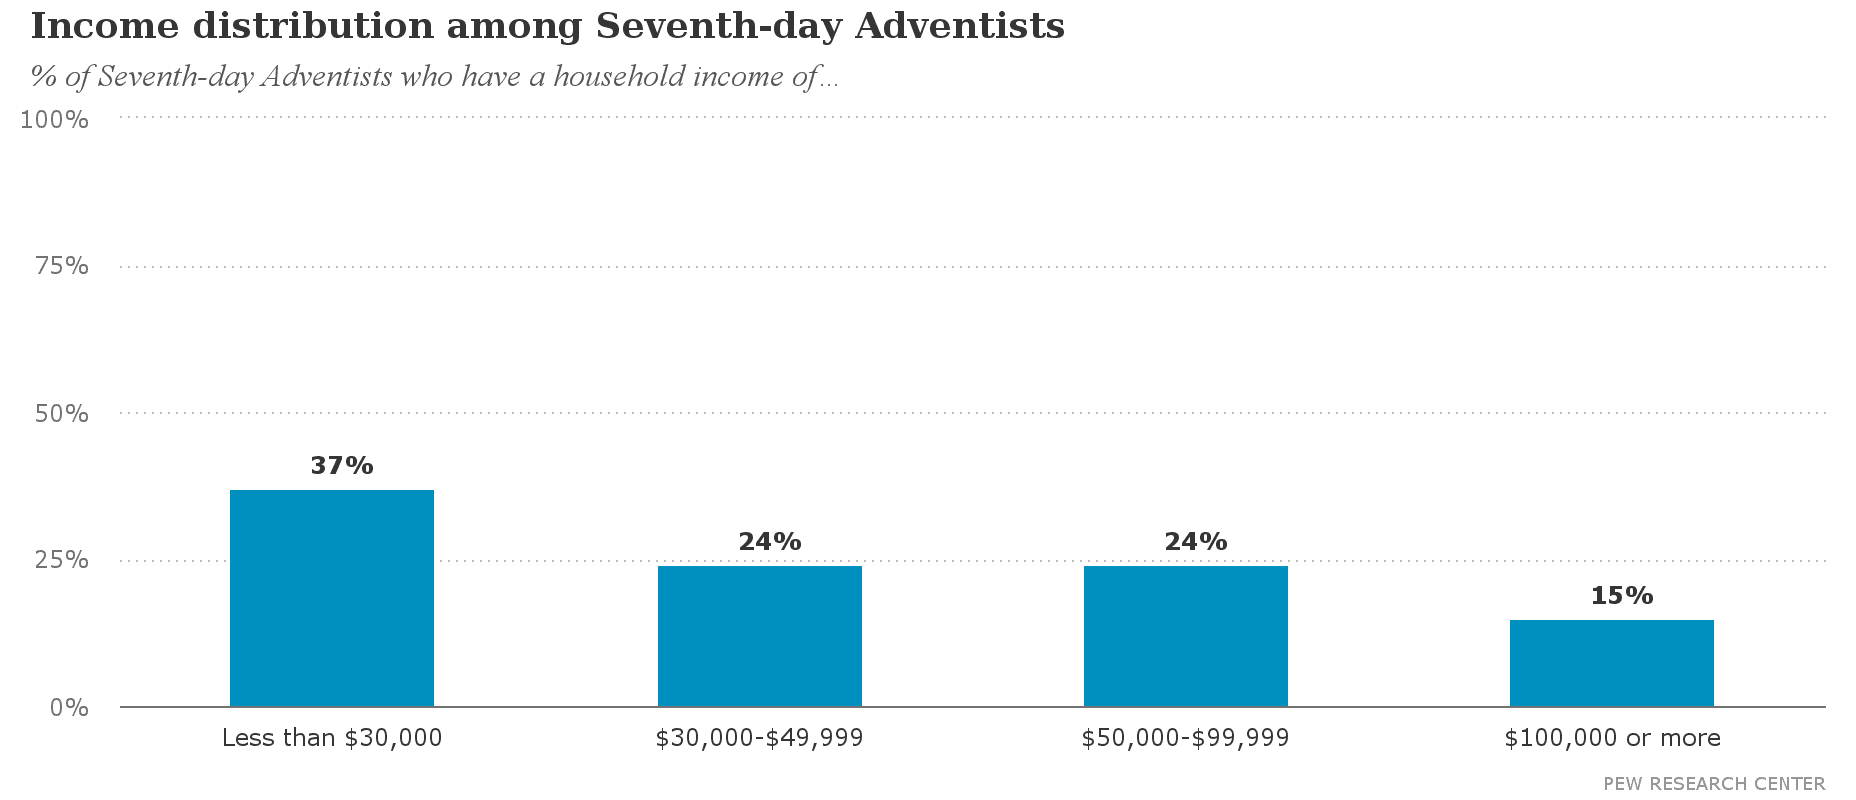 Income distribution among Seventh day Adventists